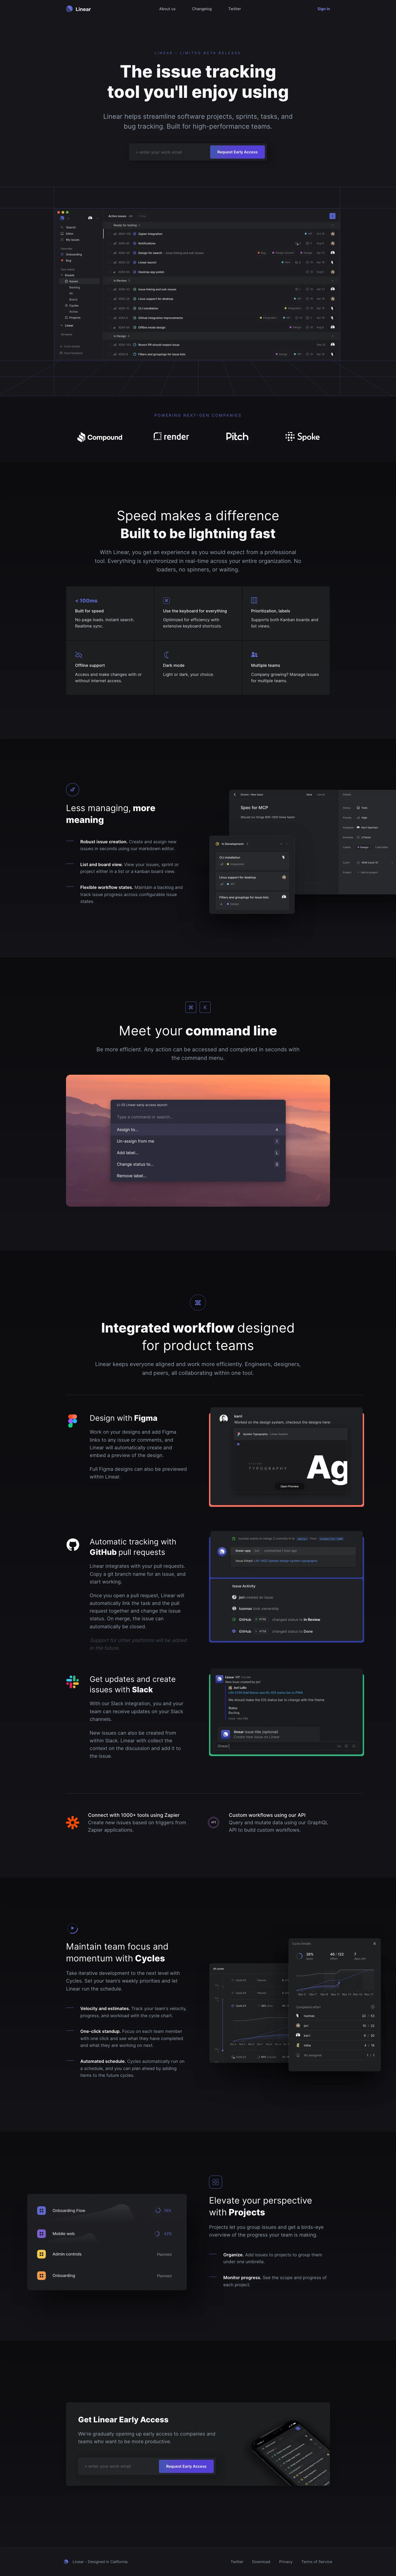 Linear Landing Page Example: Linear lets you manage software development and track bugs. Linear's streamlined design is built for speed and efficiency — helping high performing teams accomplish great things.